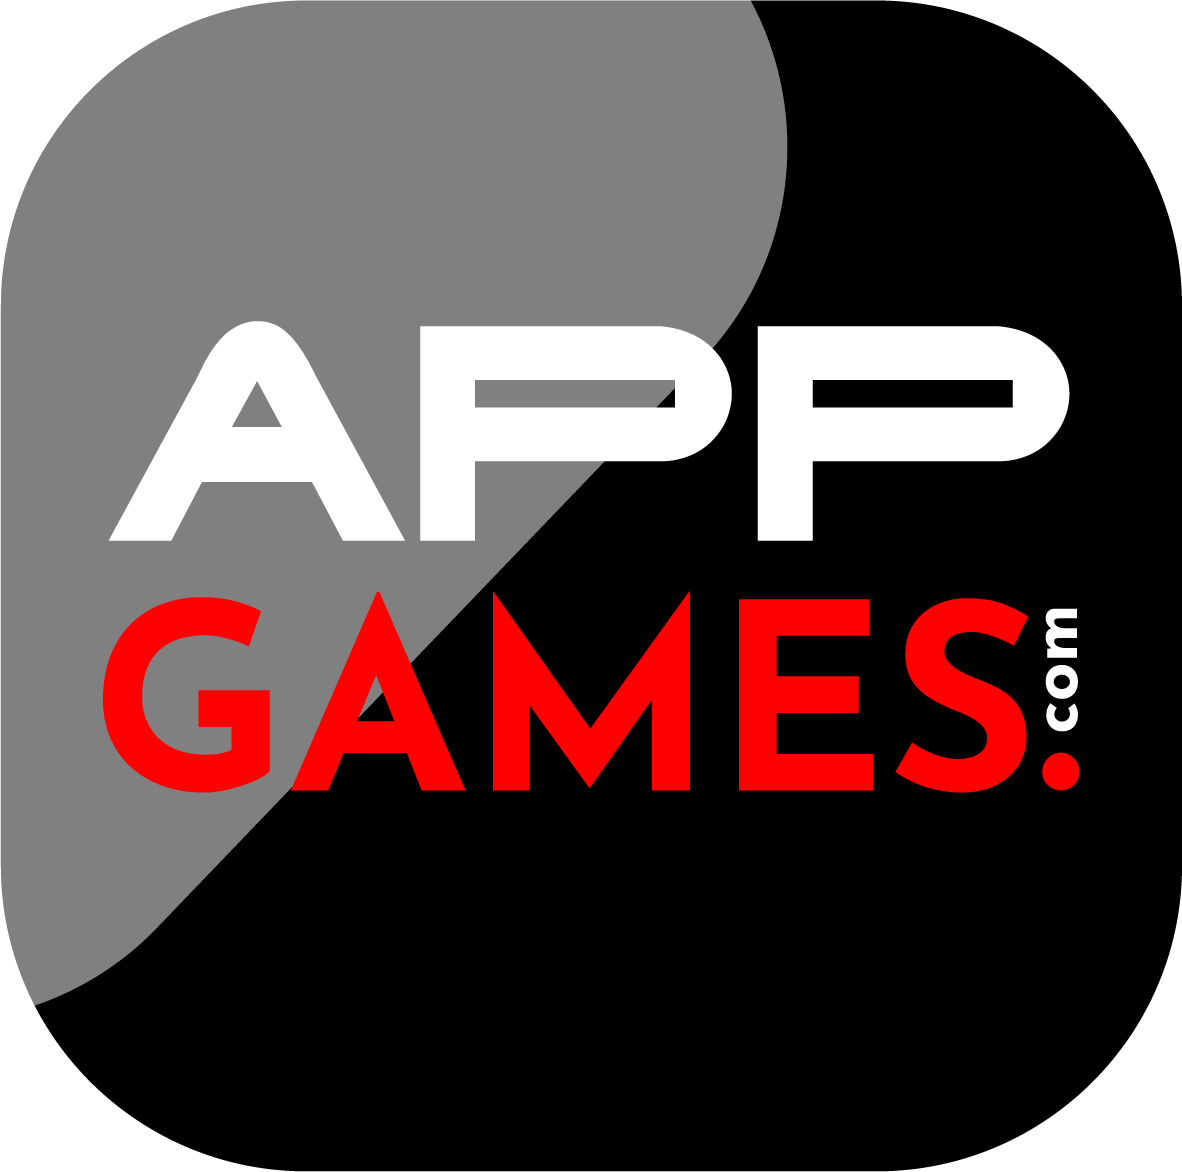 Mobile Gaming Resource Site AppGames.com Launches New Website